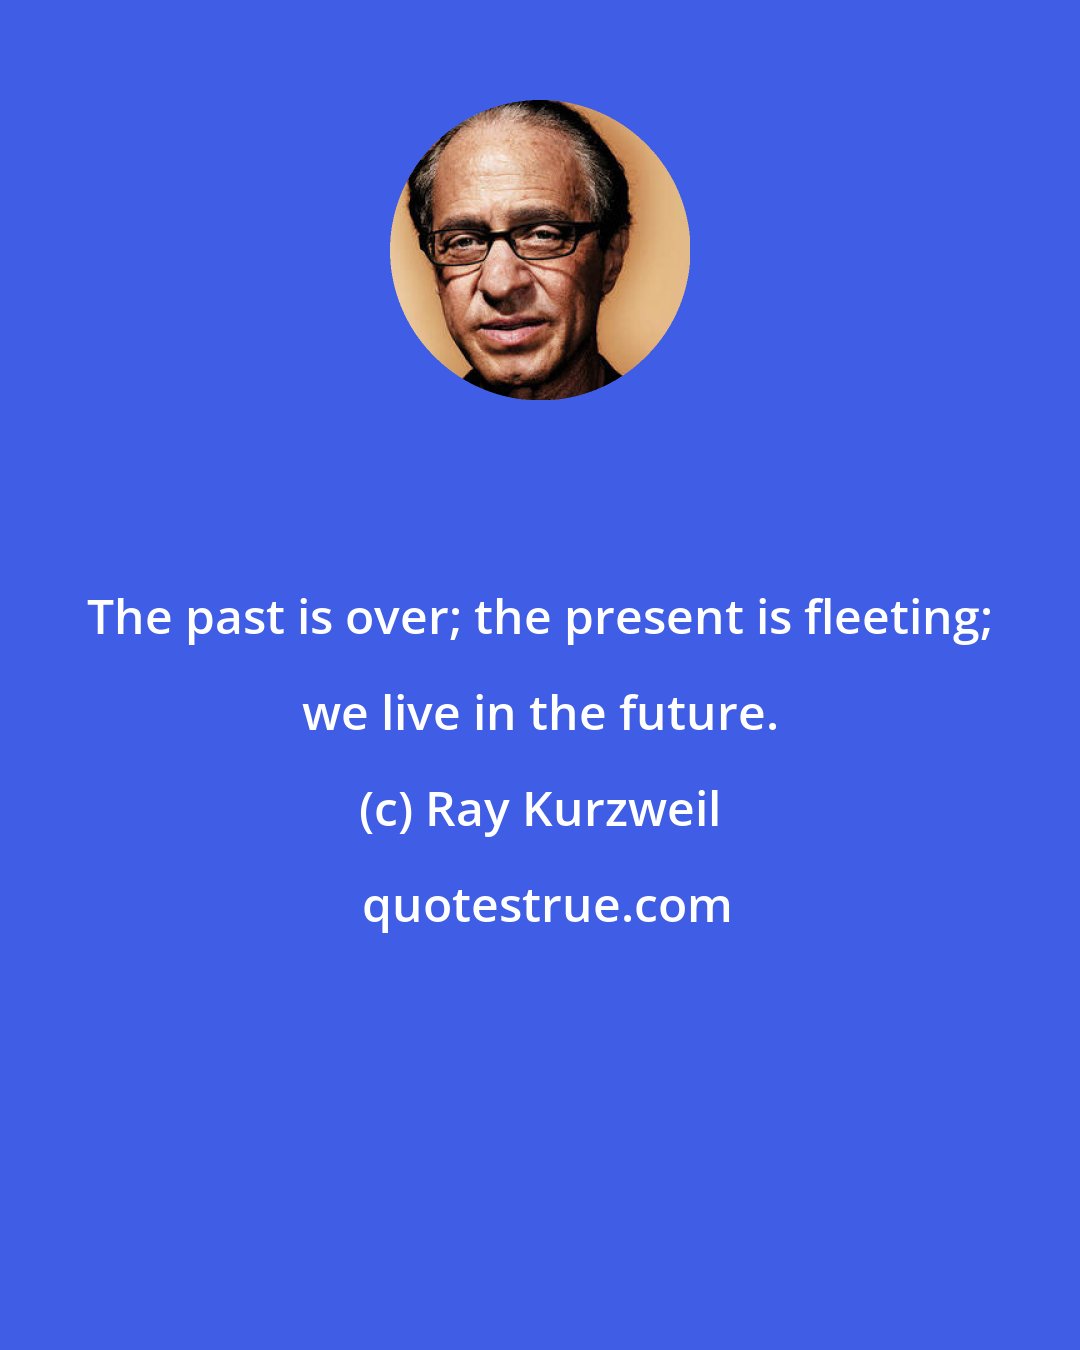 Ray Kurzweil: The past is over; the present is fleeting; we live in the future.